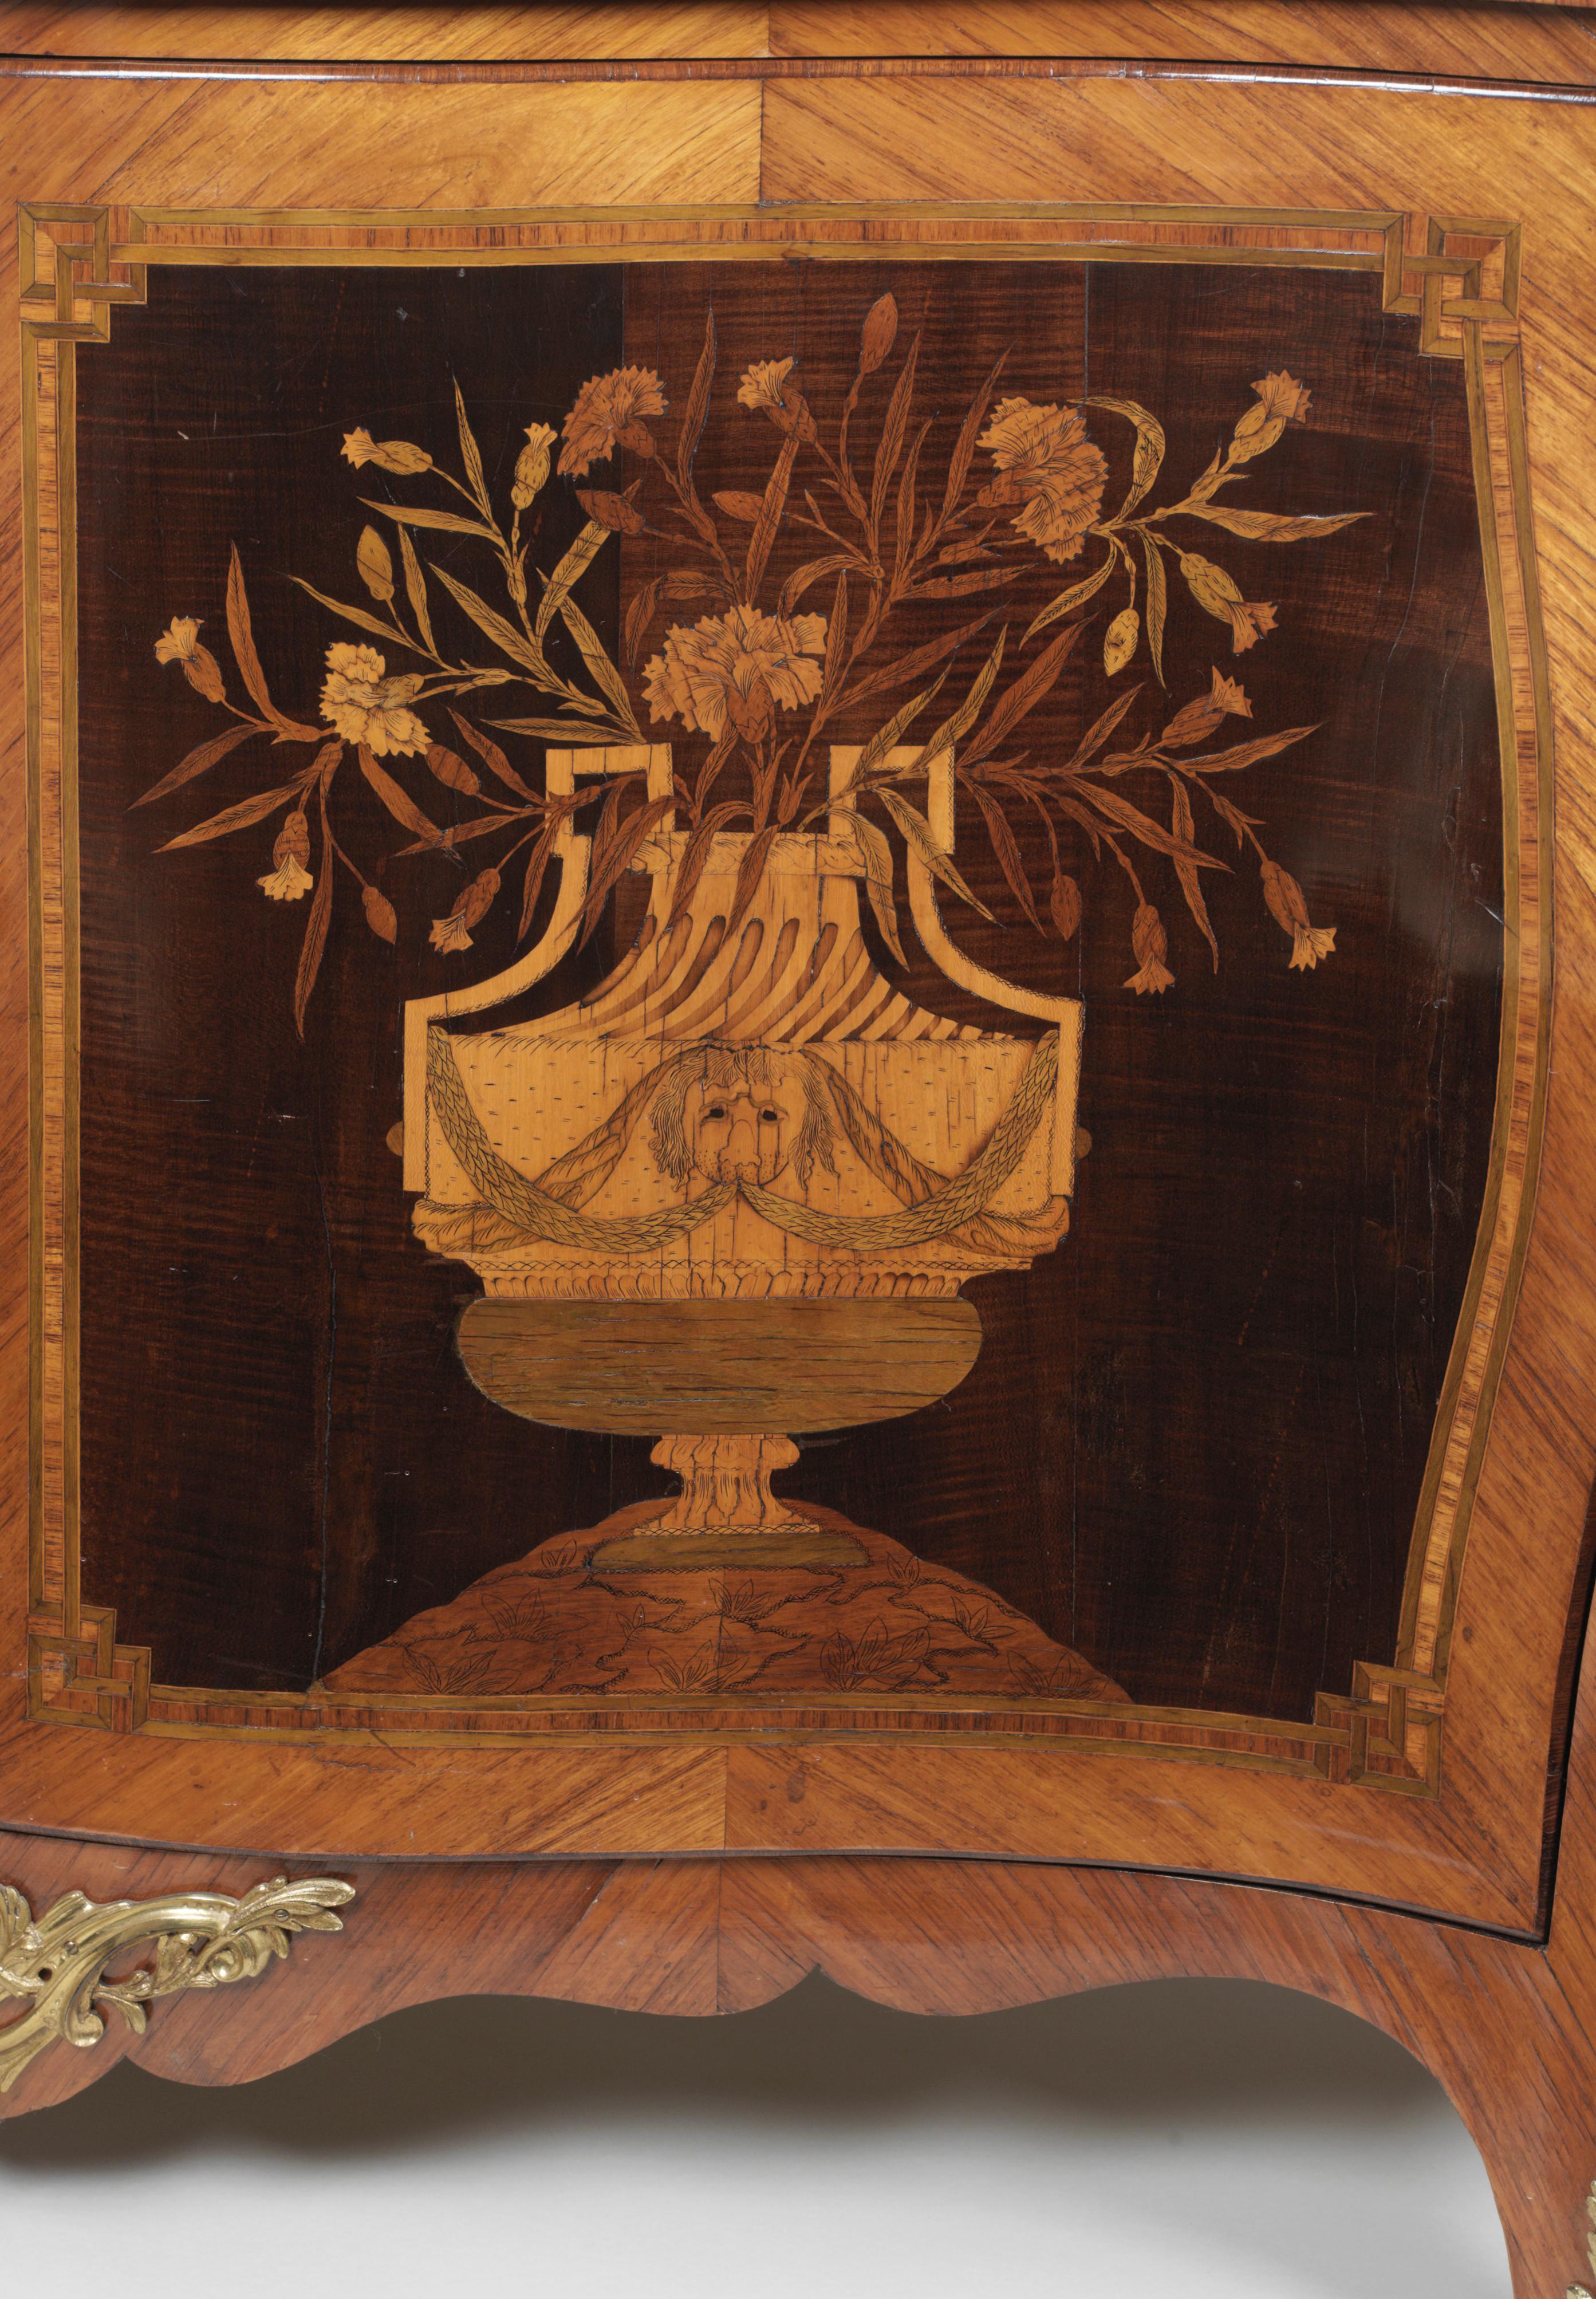 The top of the serpentine commode is inlaid with a marquetry panel of musical trophy hanging from a ribbon within a foliate cartouche, flanked by sprays of ribbon-tied flowers, on a background of harewood. It has a broad cross-banded border and